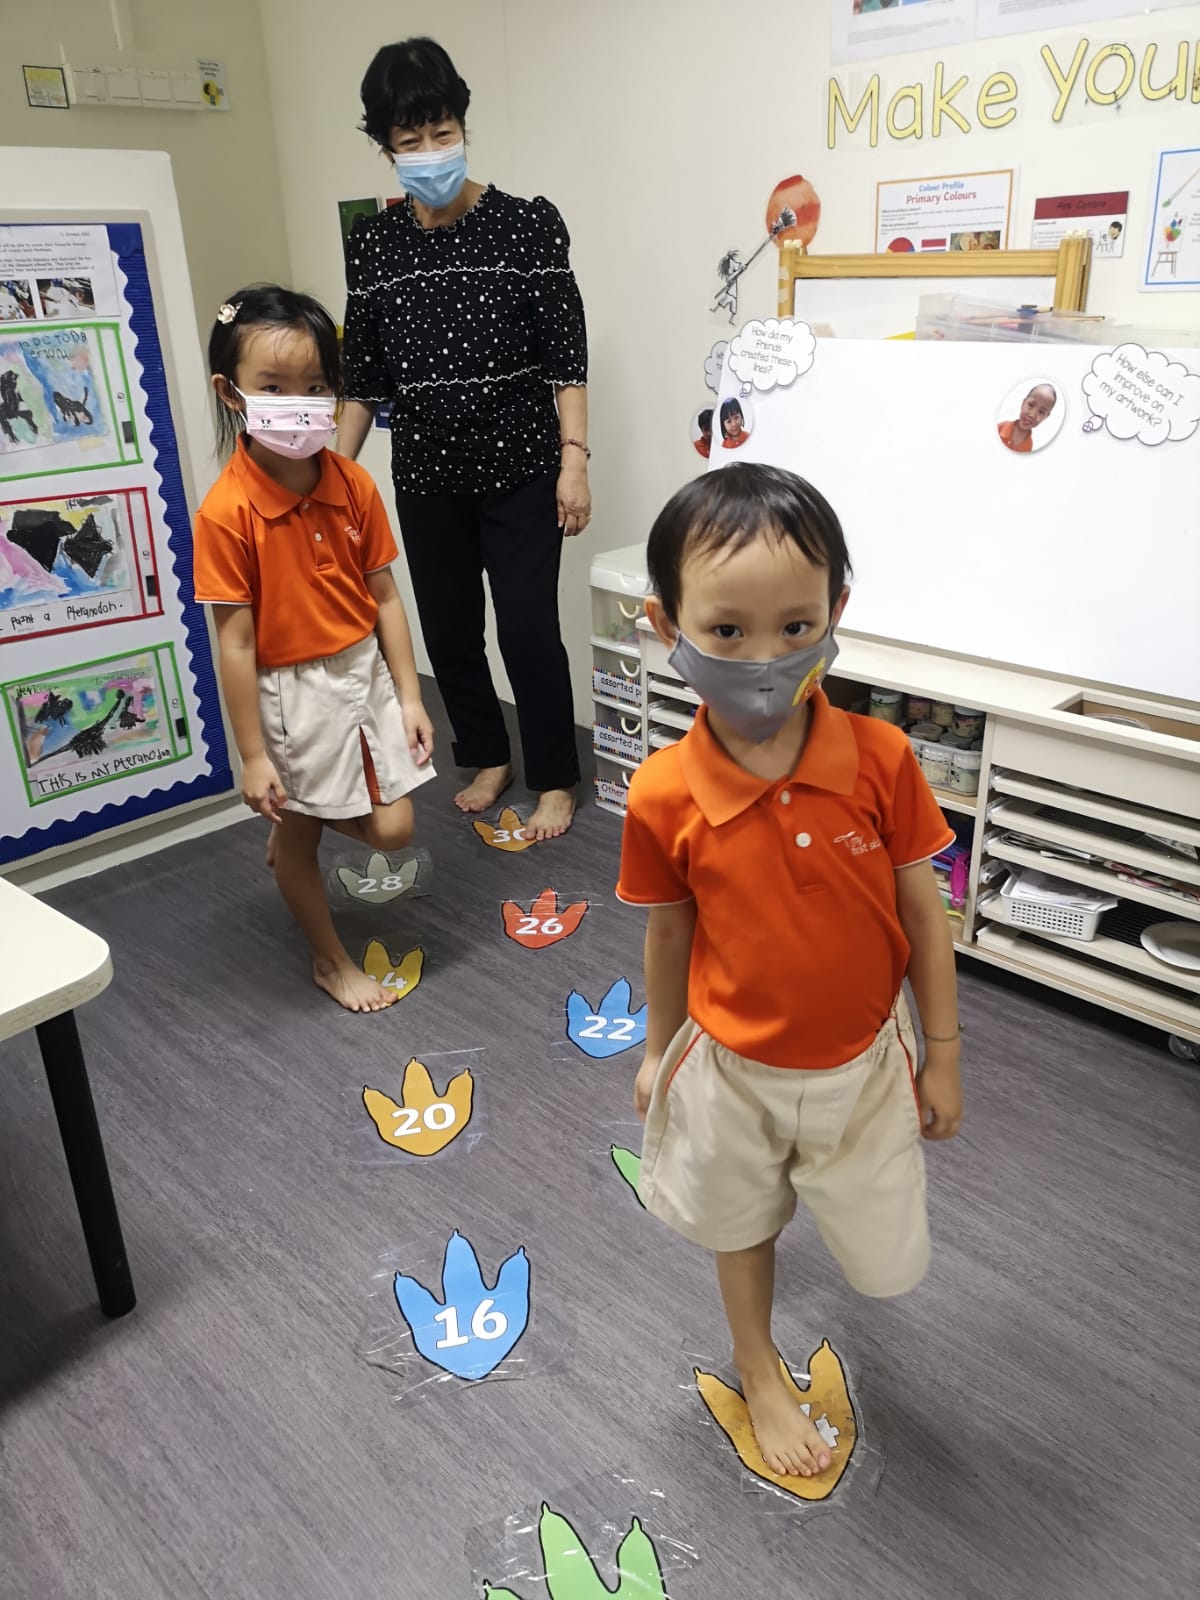 Wendy Ong, Executive Principal of My First Skool at 140 Serangoon North, received the Early Childhood Innovation award for her team's 'Move & Groove' Project. The project aims to make transitions between classes and activities fun and less stressful for preschool children.